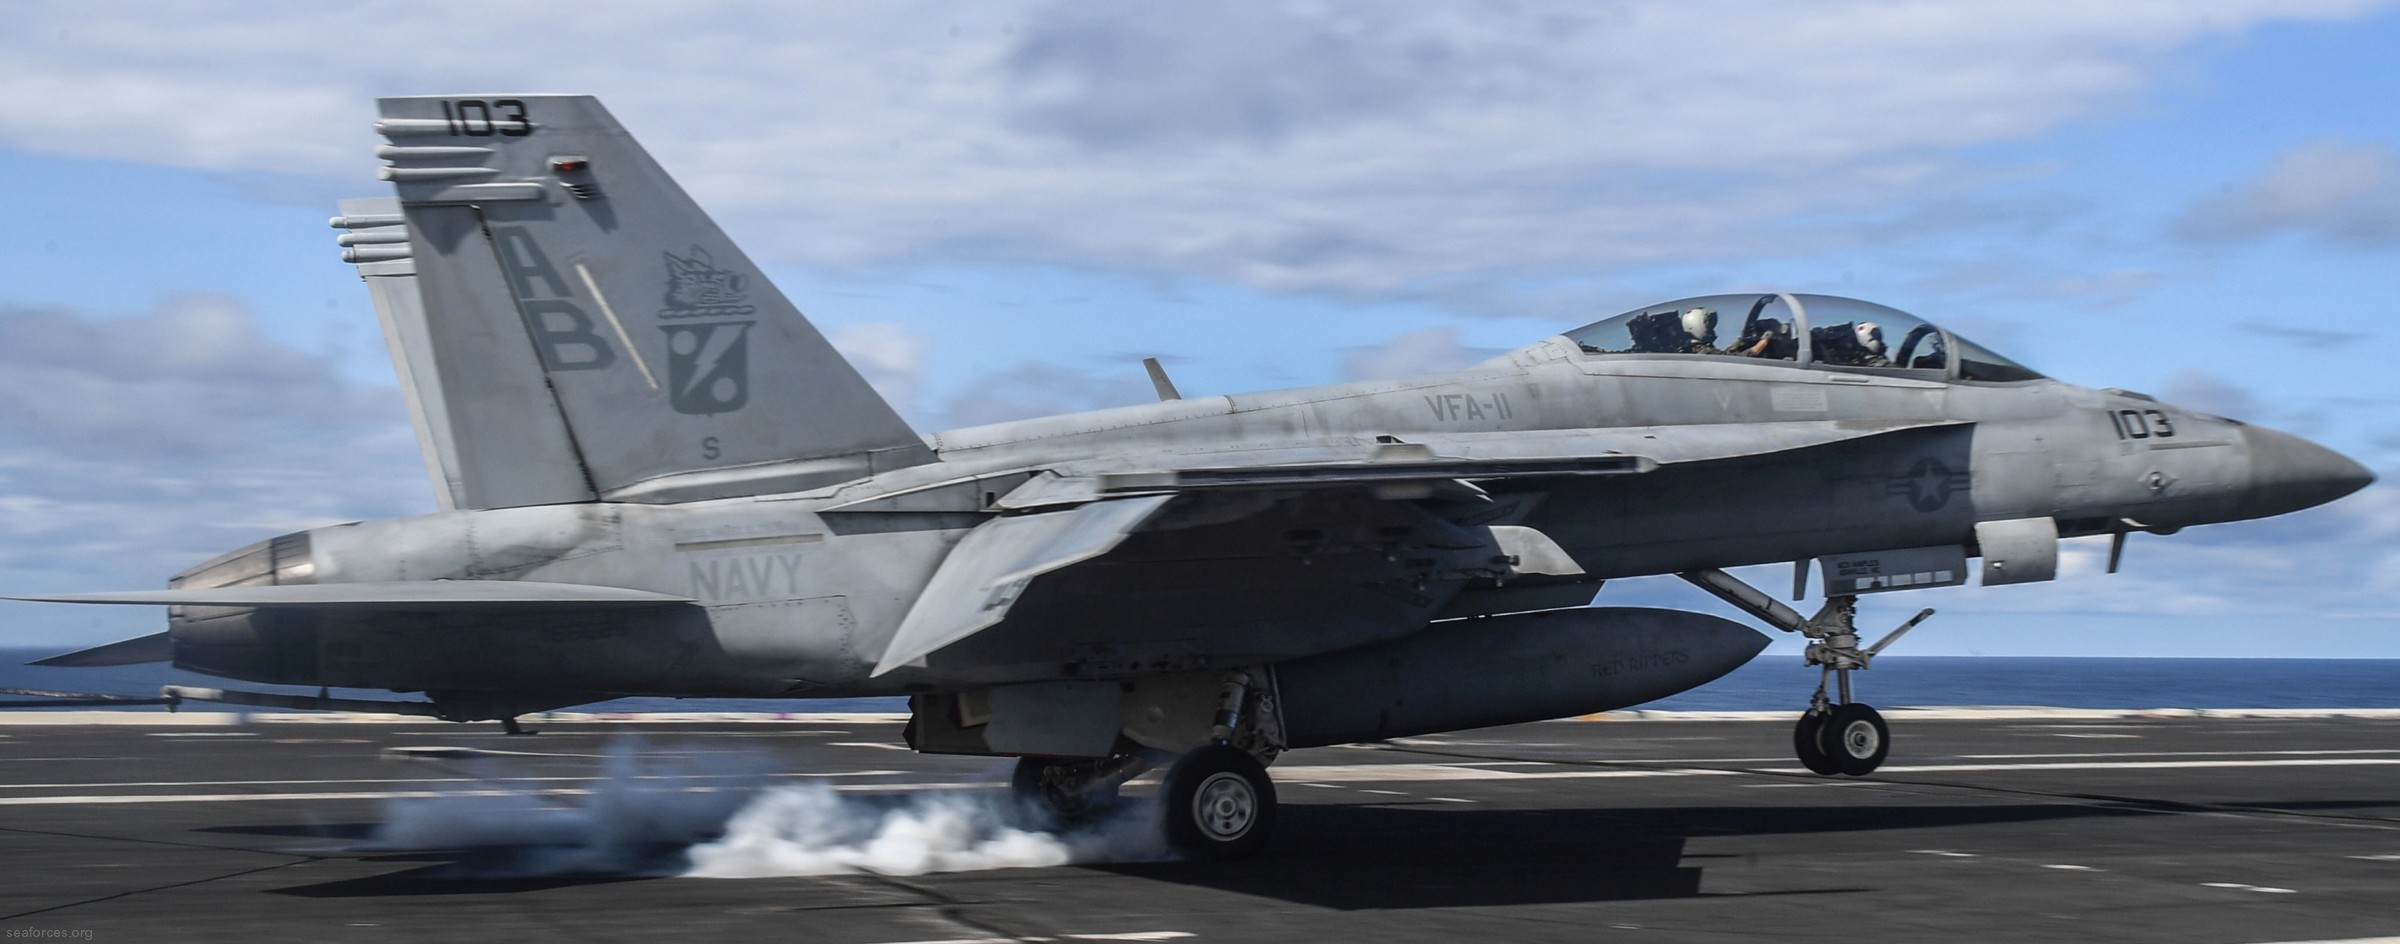 vfa-11 red rippers strike fighter squadron us navy f/a-18f super hornet carrier air wing cvw-1 uss harry s. truman cvn-75 56